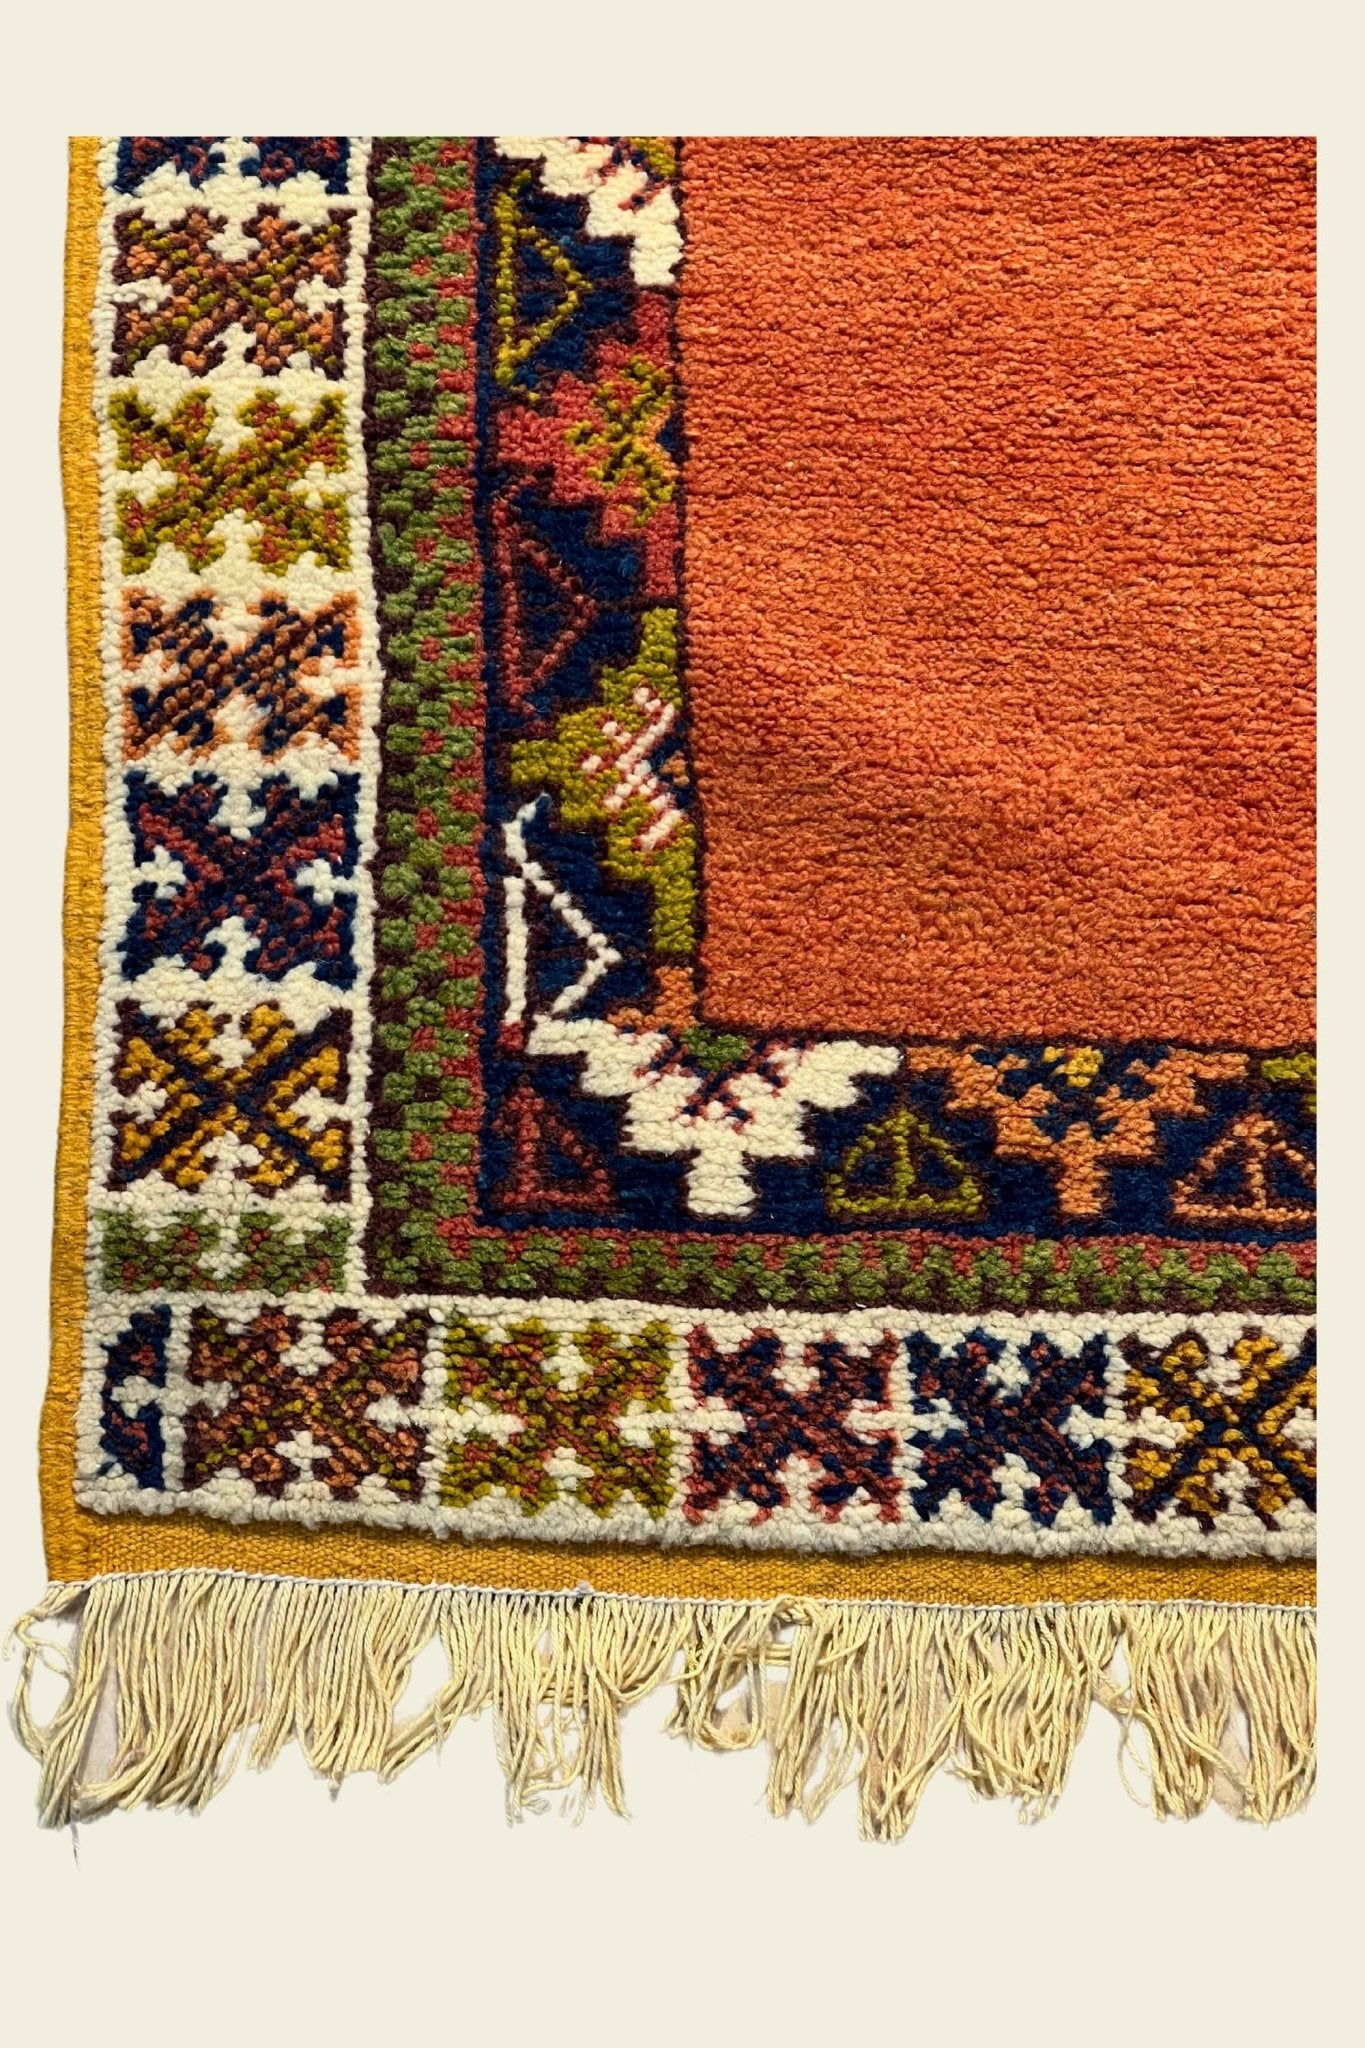 Moroccan area rug from Tazenakht, Wool and Thread, 5'3" x 8'6" Or 160 cm x 260 cm - Dar Bouchaib Marrakech